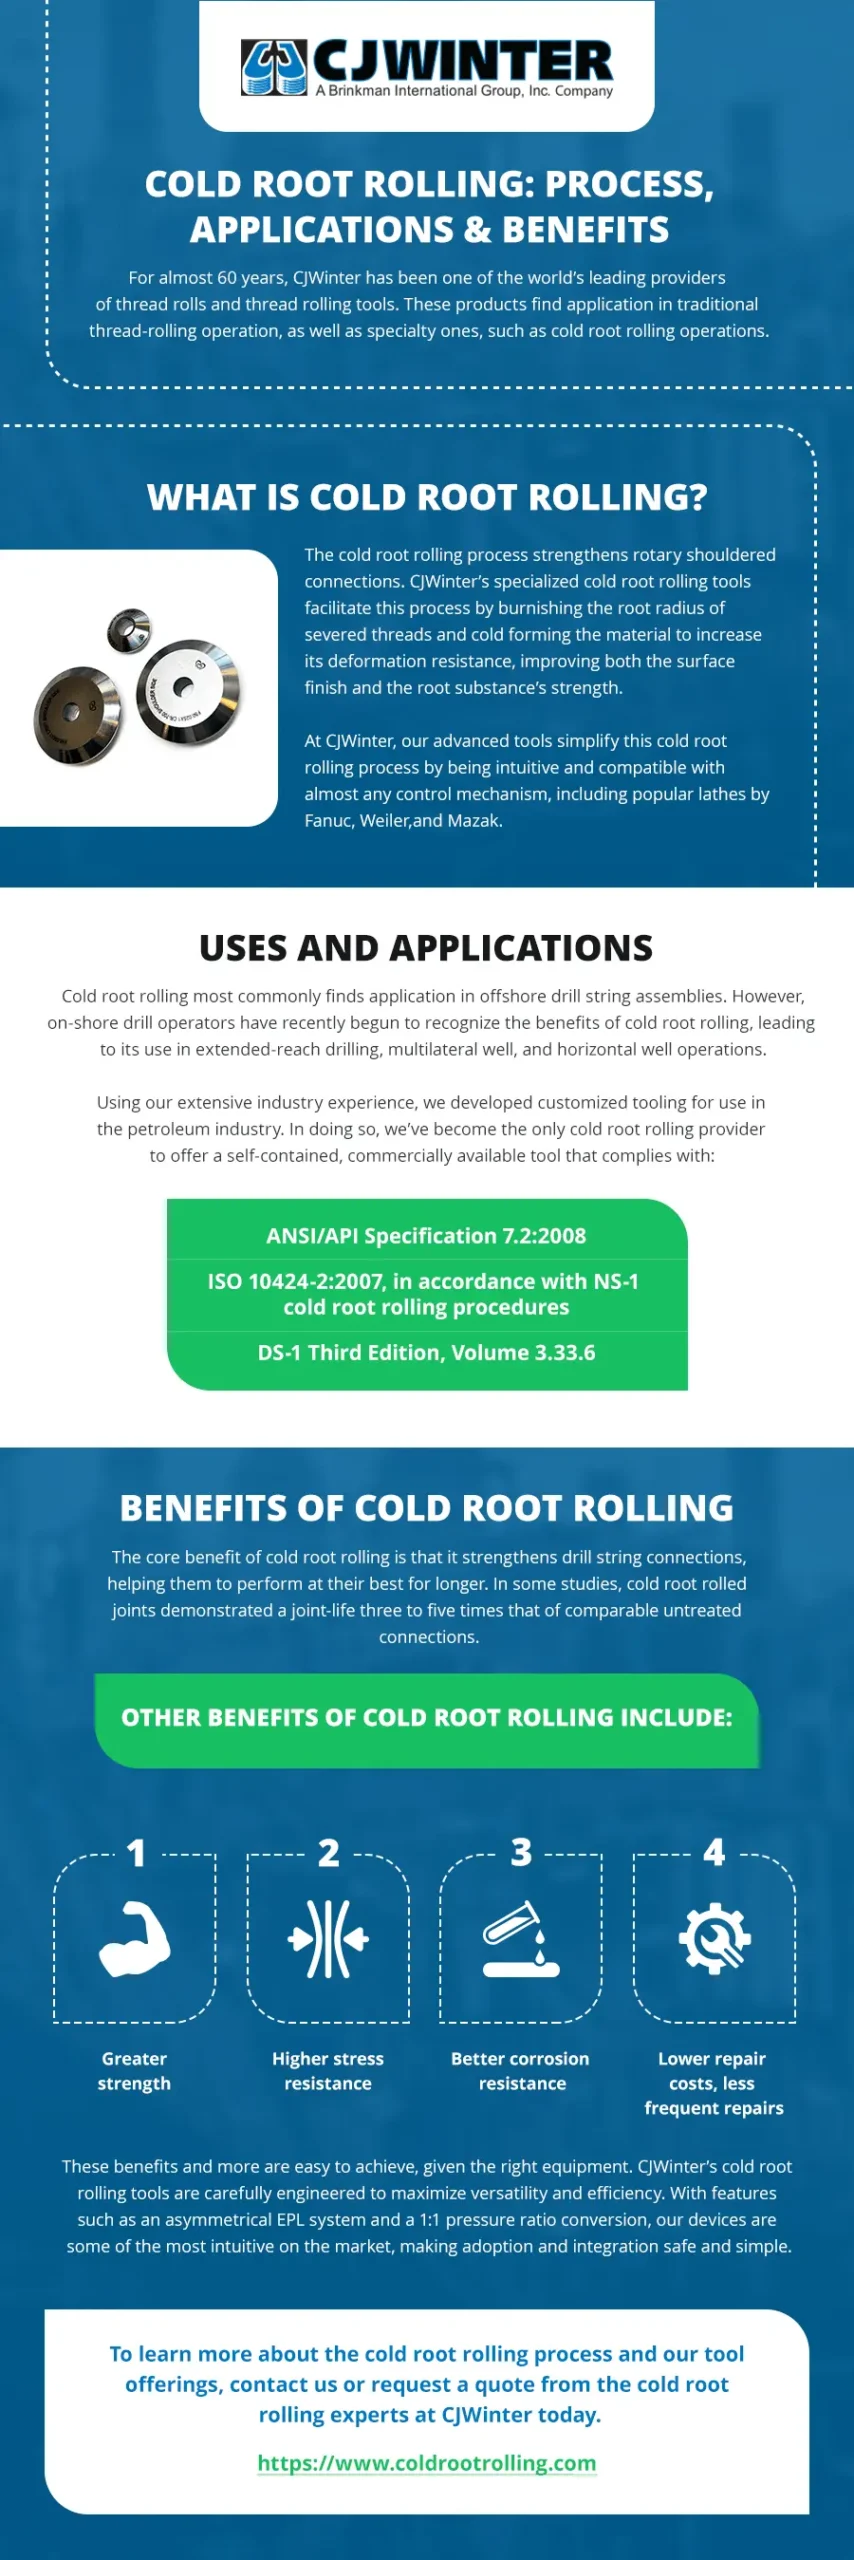 An infographic decting the cold root rolling process, applications and benefits.